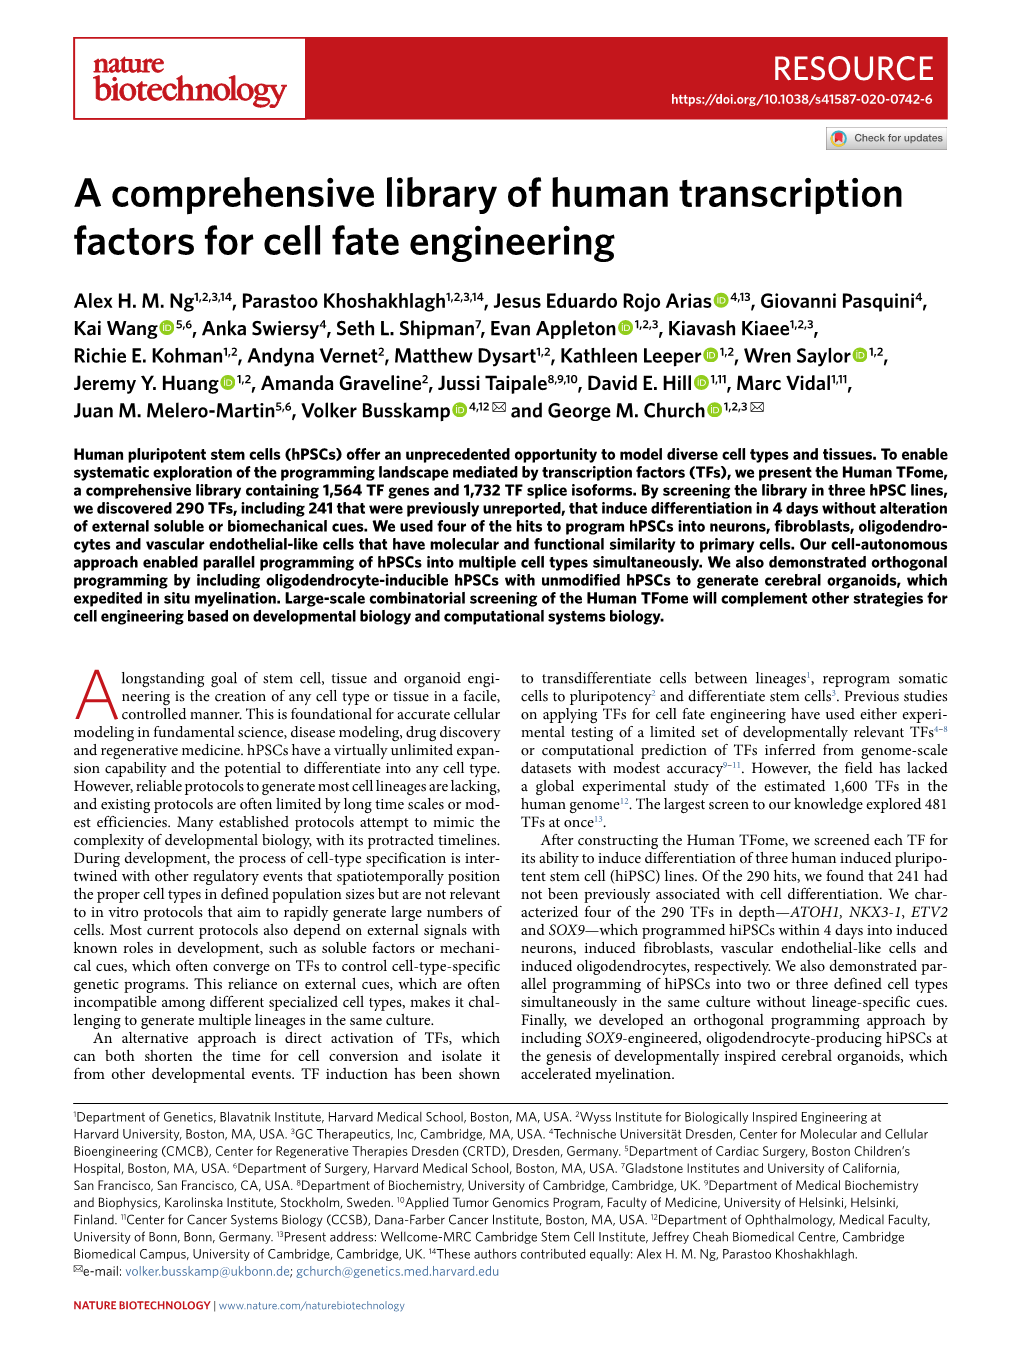 A Comprehensive Library of Human Transcription Factors for Cell Fate Engineering